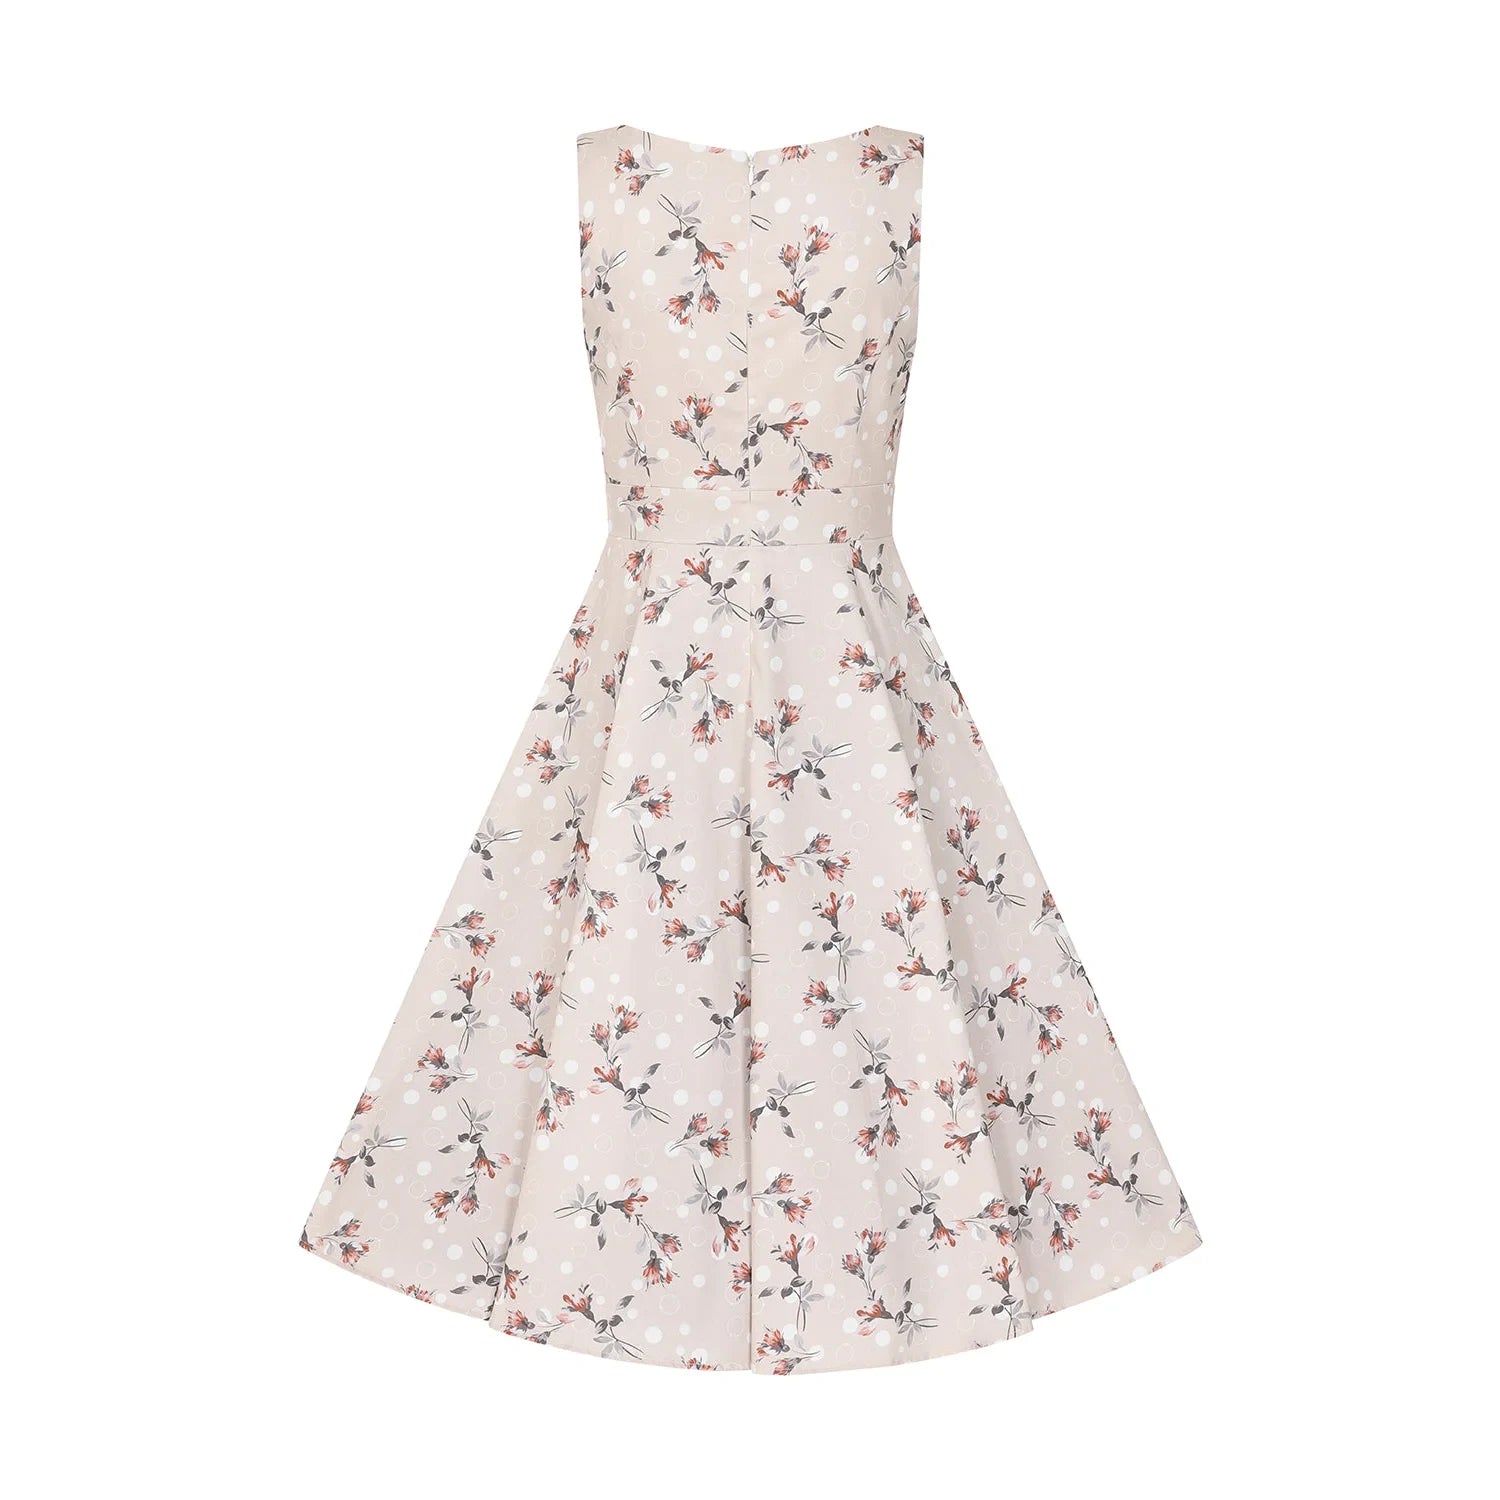 Pale Pink Polka Dot and Floral Sleeveless Swing Tea Dress